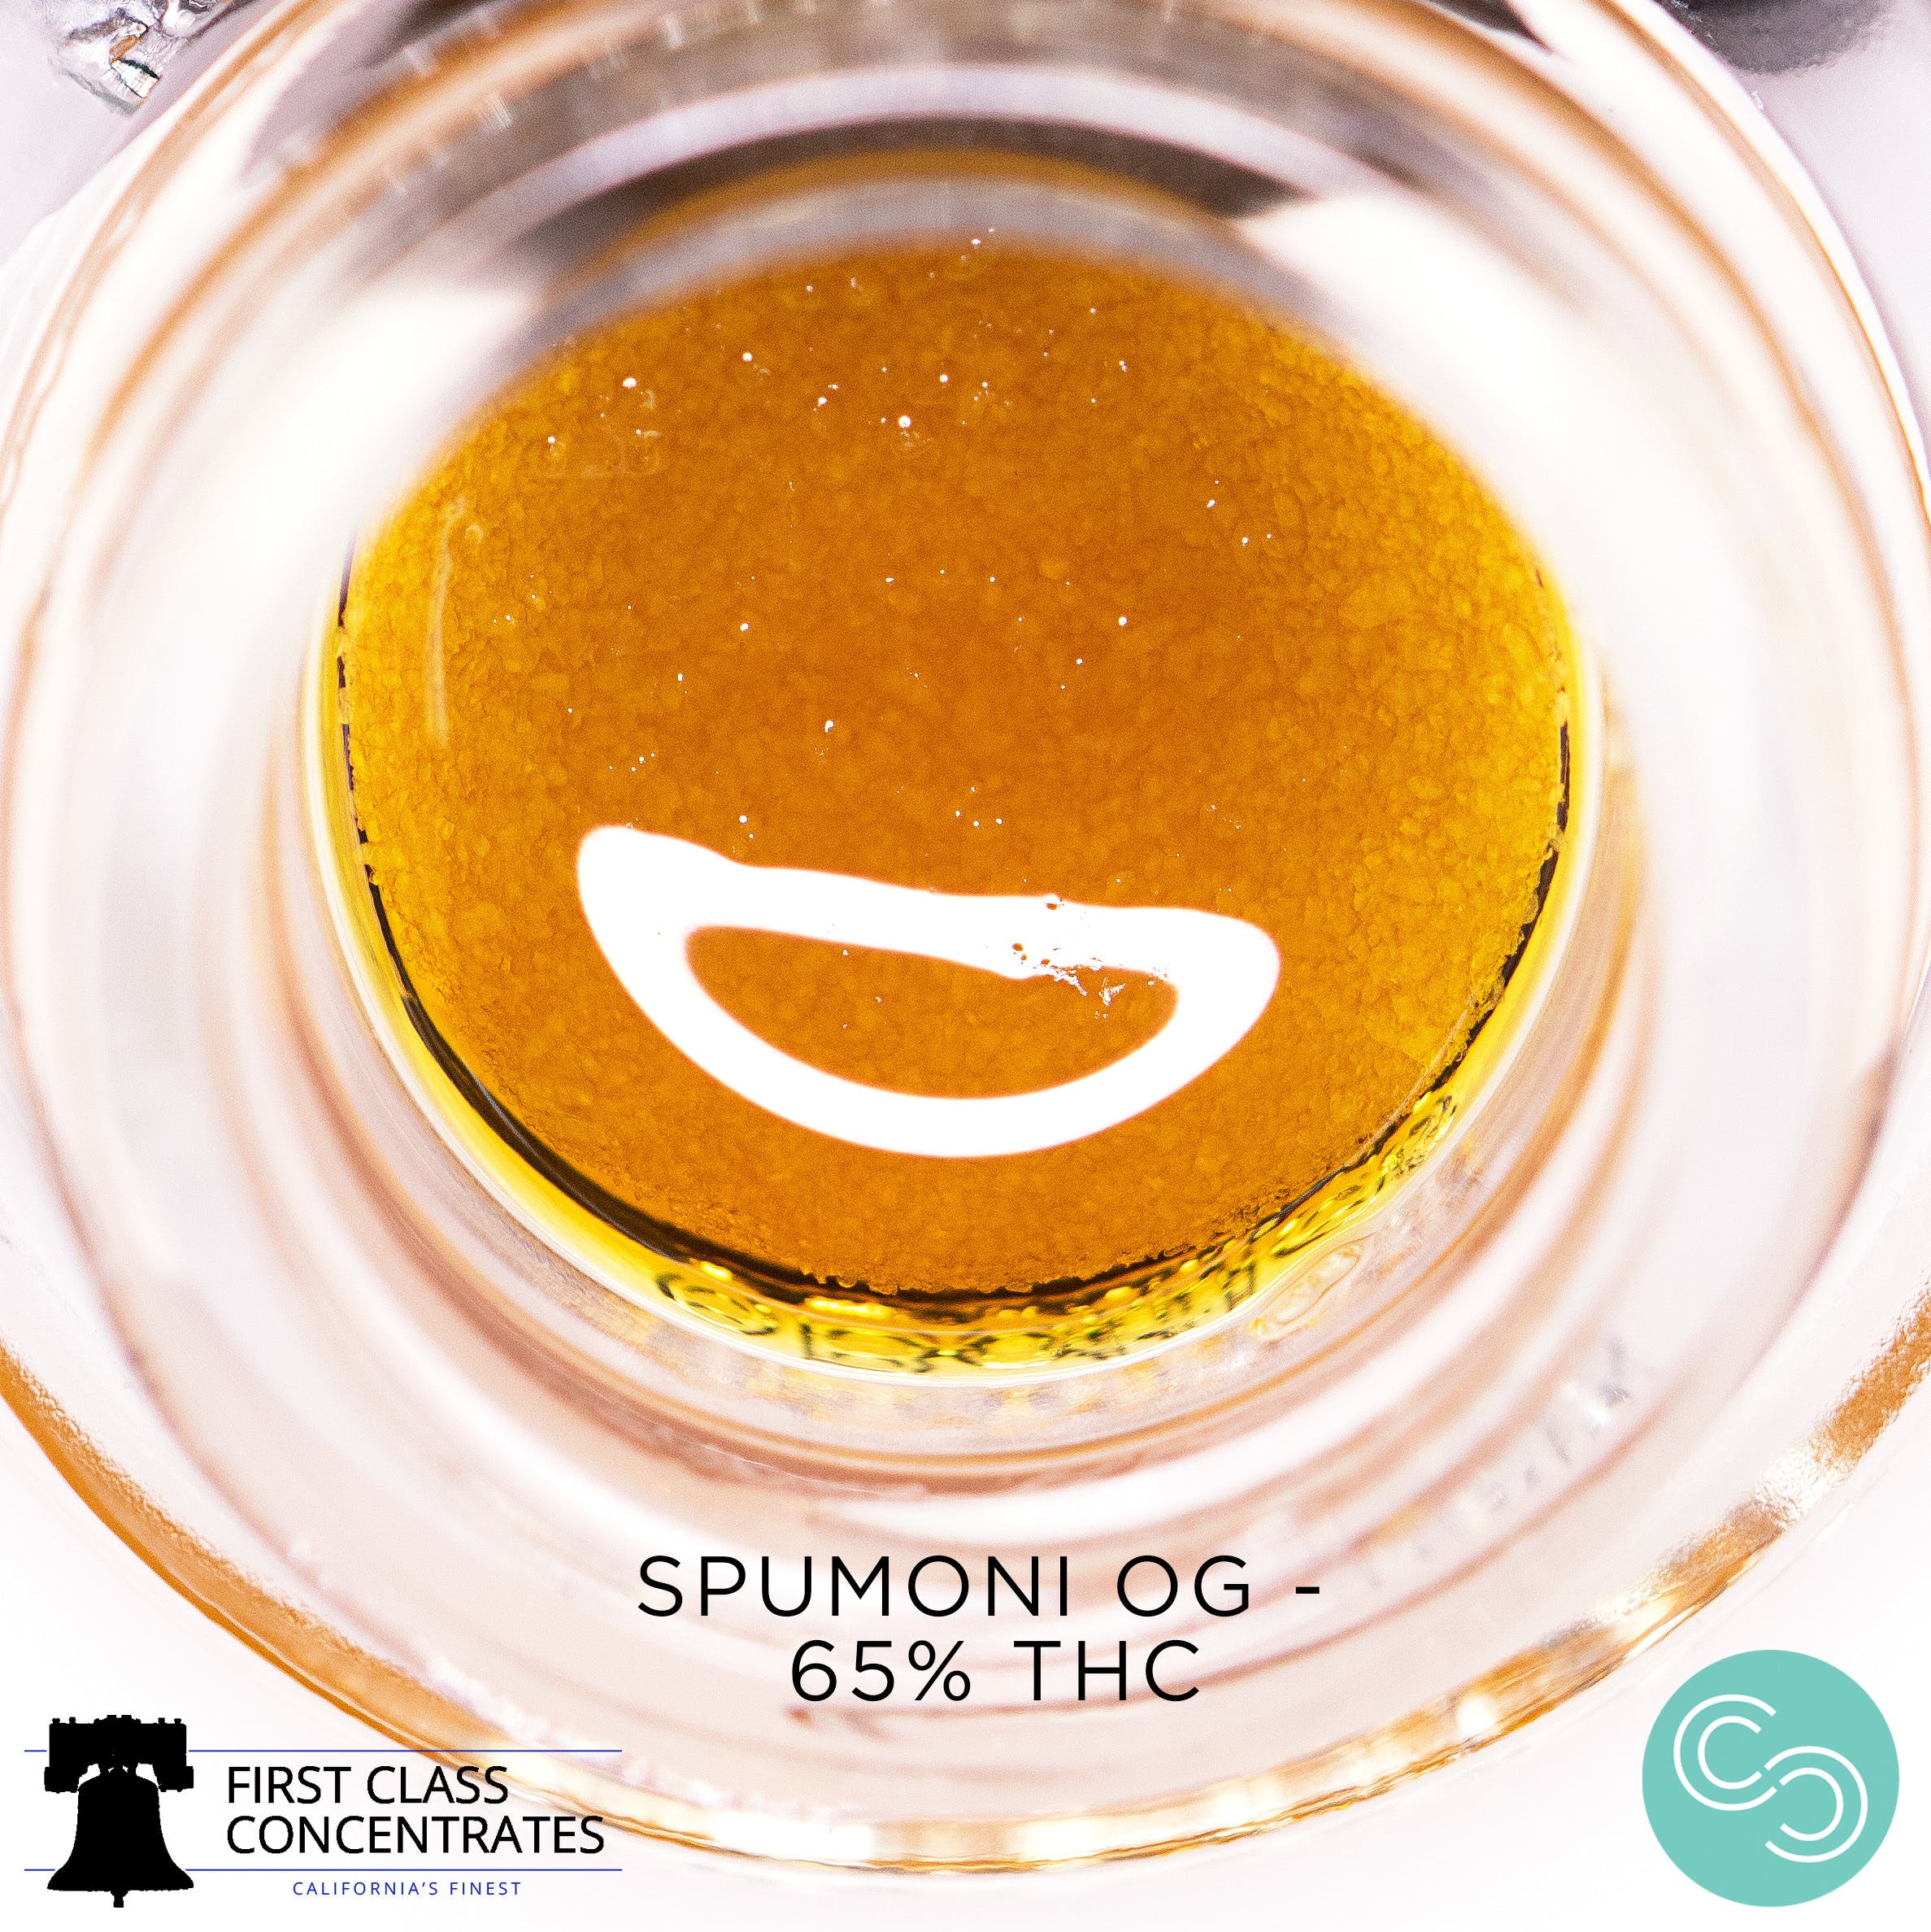 First Class Concentrates - Spumoni - 65% THCA